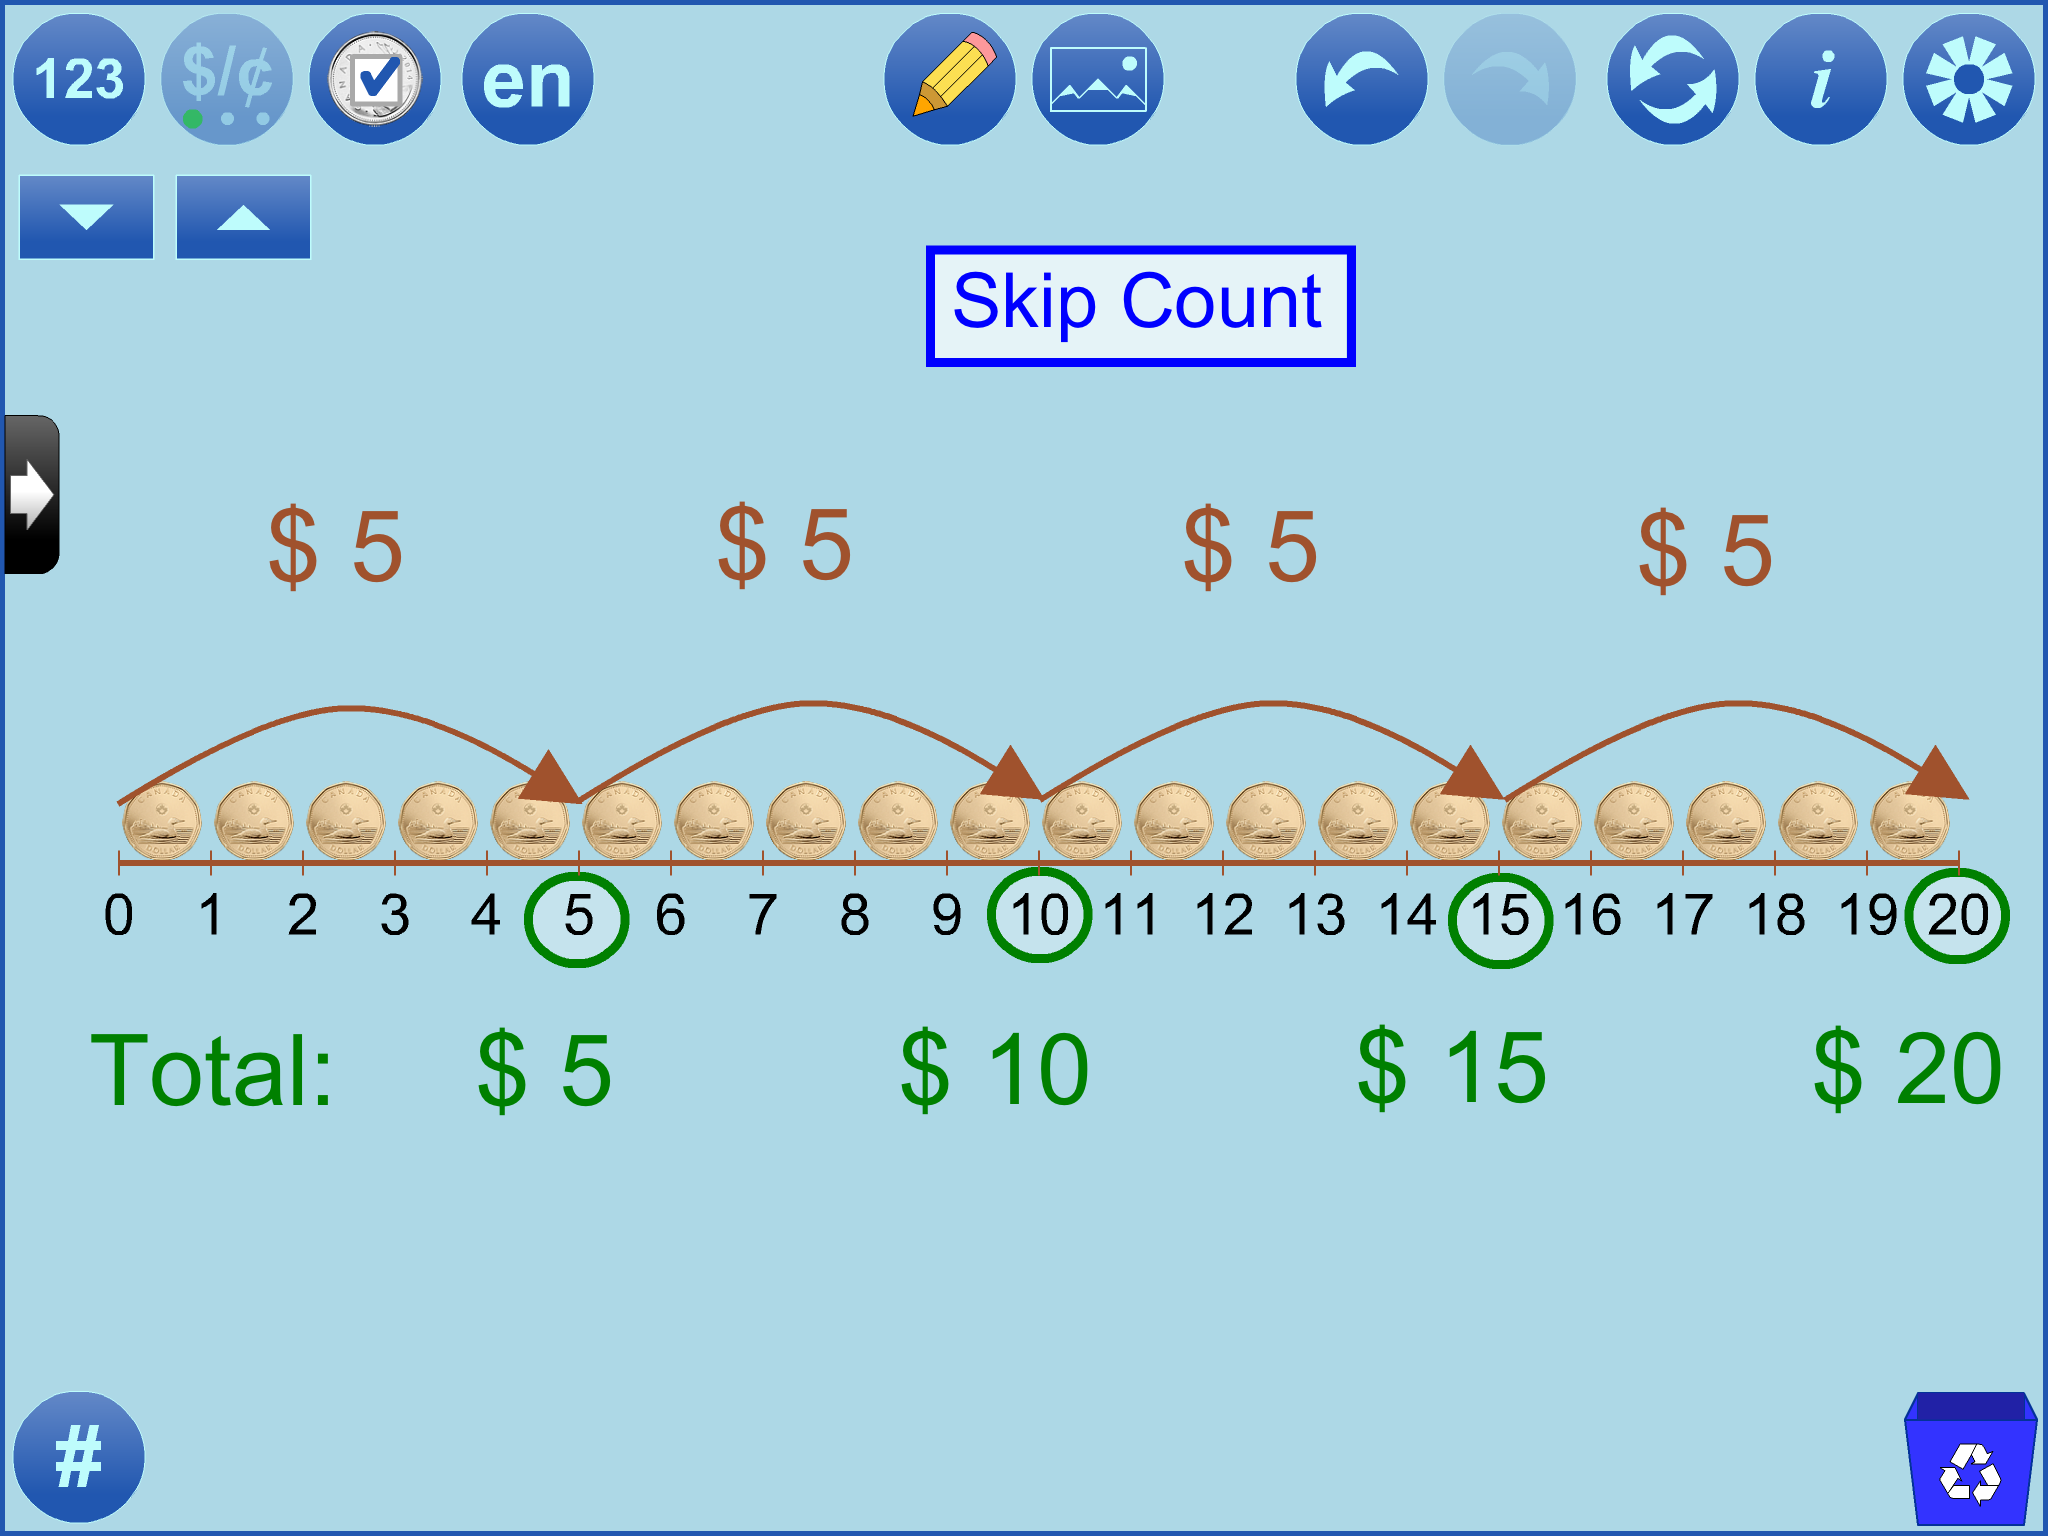 skip count by $5